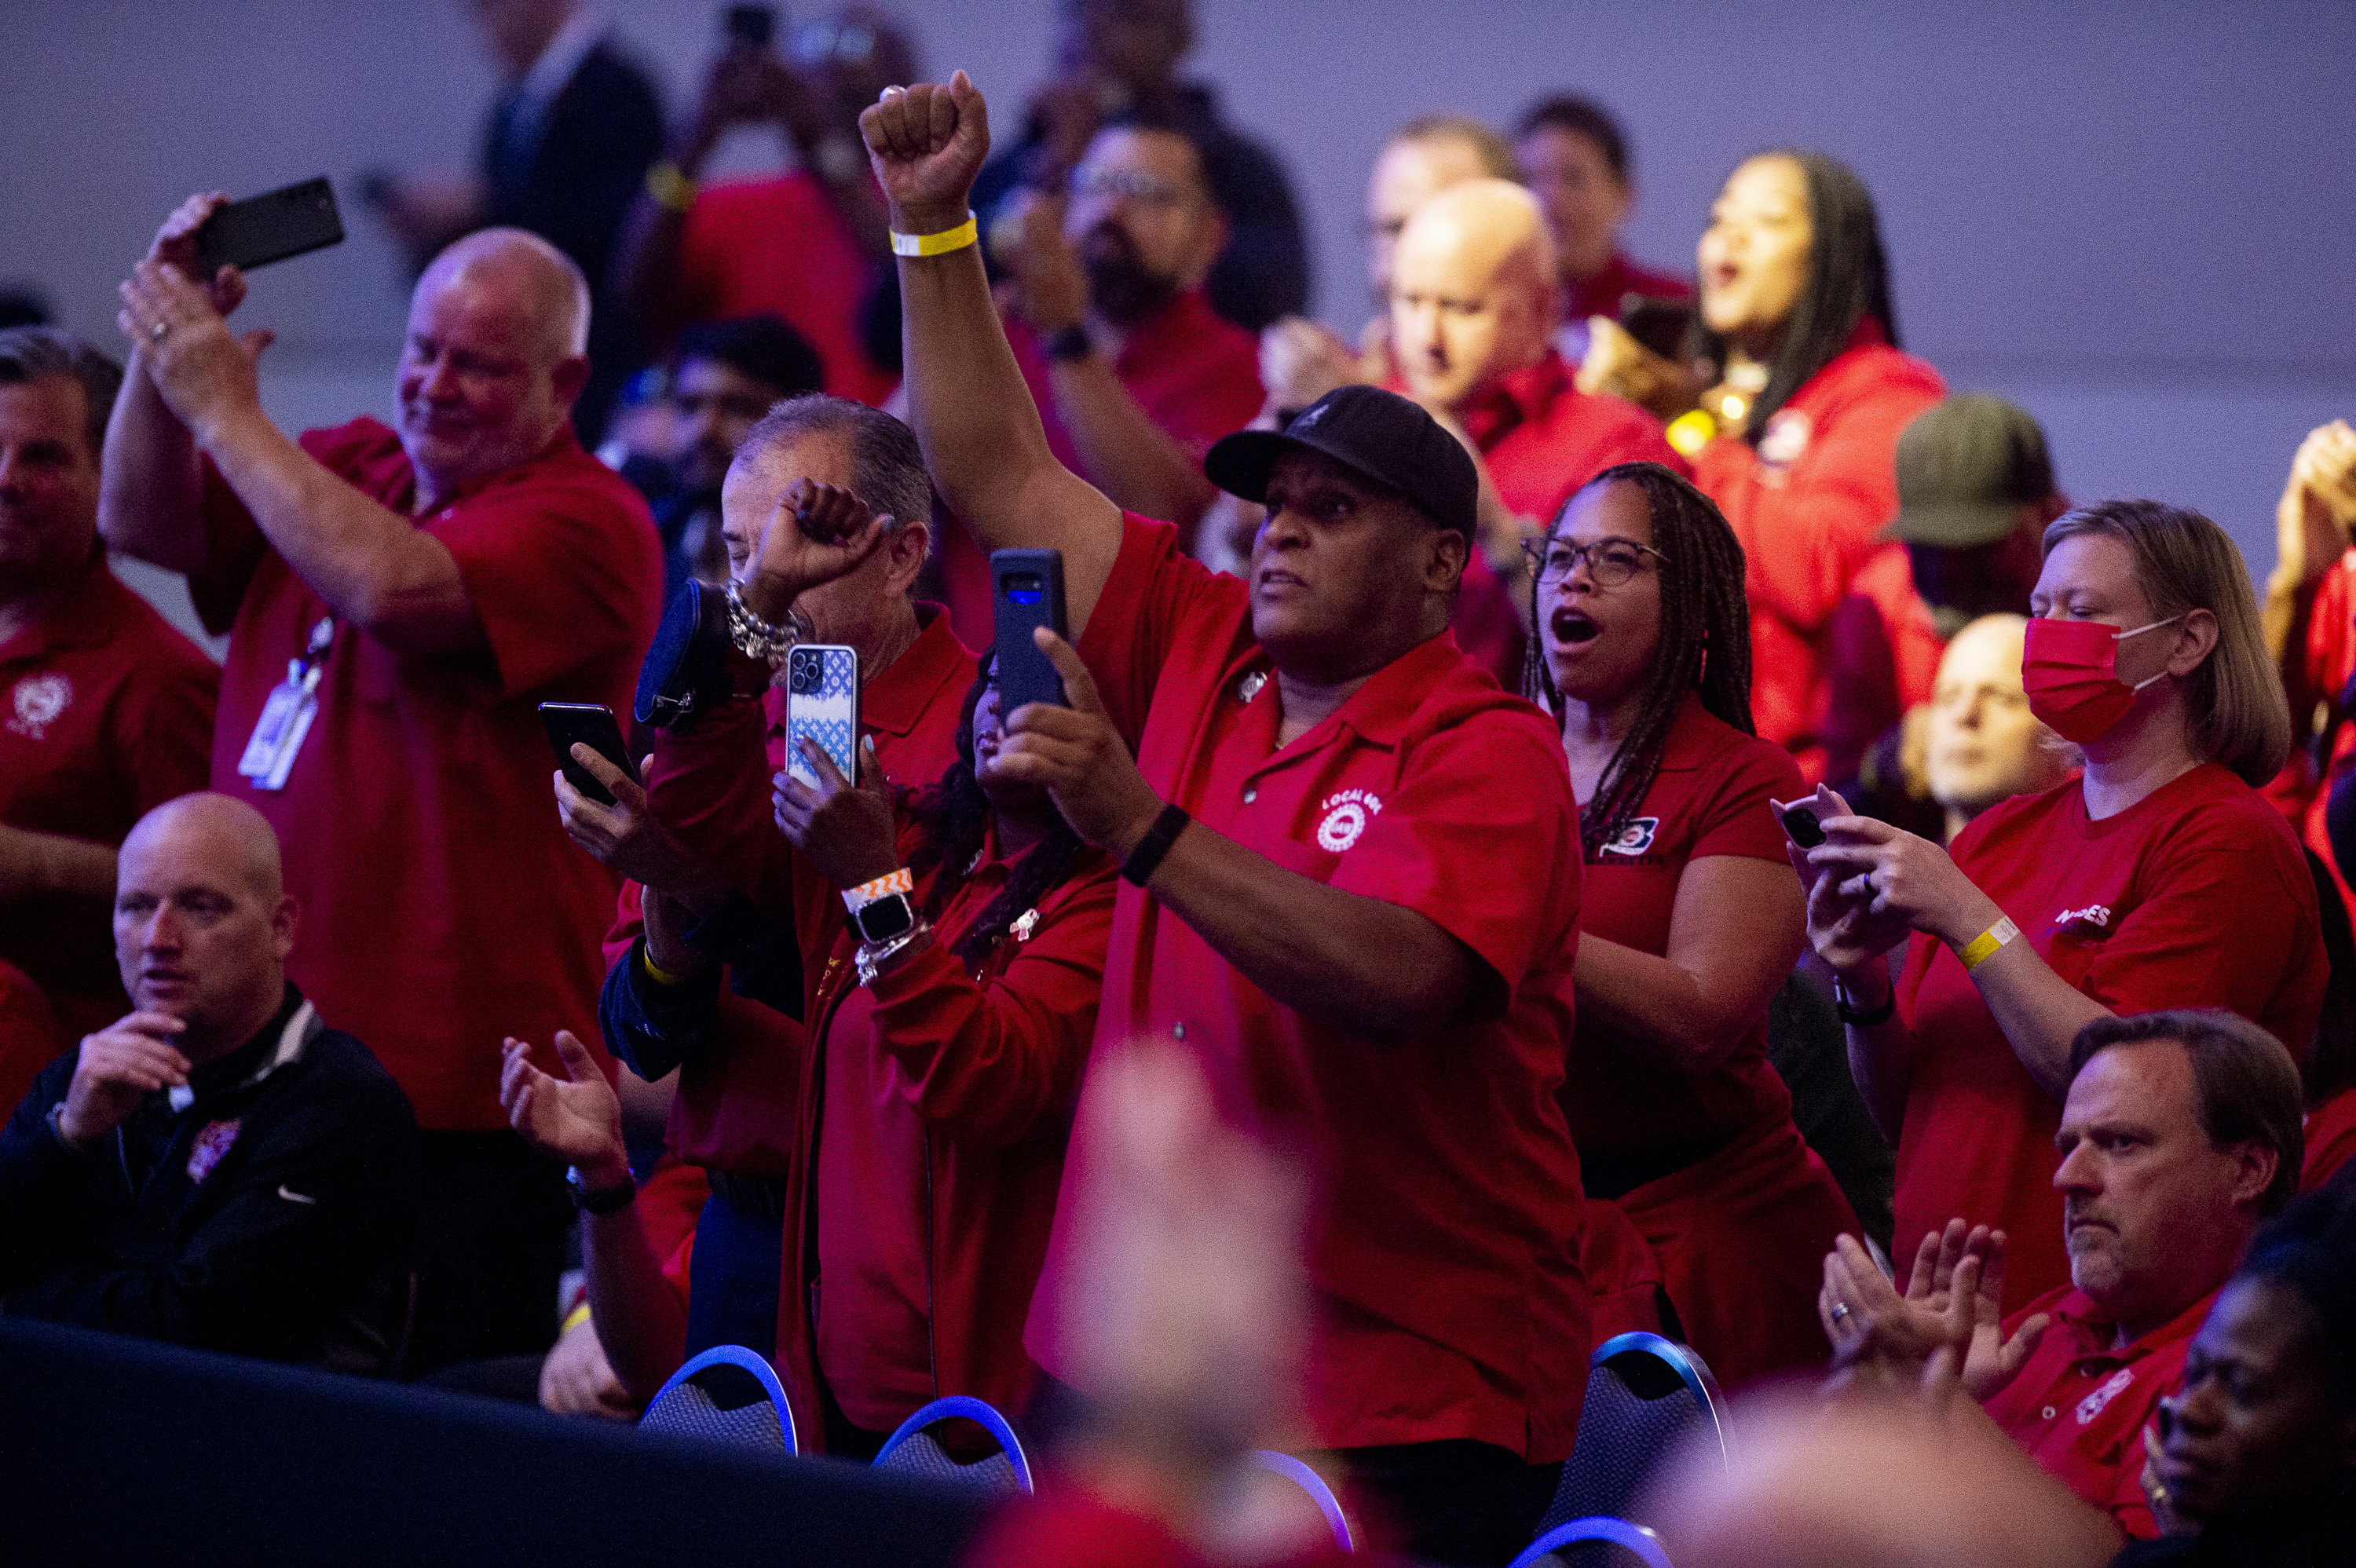 UAW members cheer as U.S. President Joe Biden speaks during the 2022 North American International Auto Show at Huntington Place in Detroit on Wednesday, Sept. 14 2022.